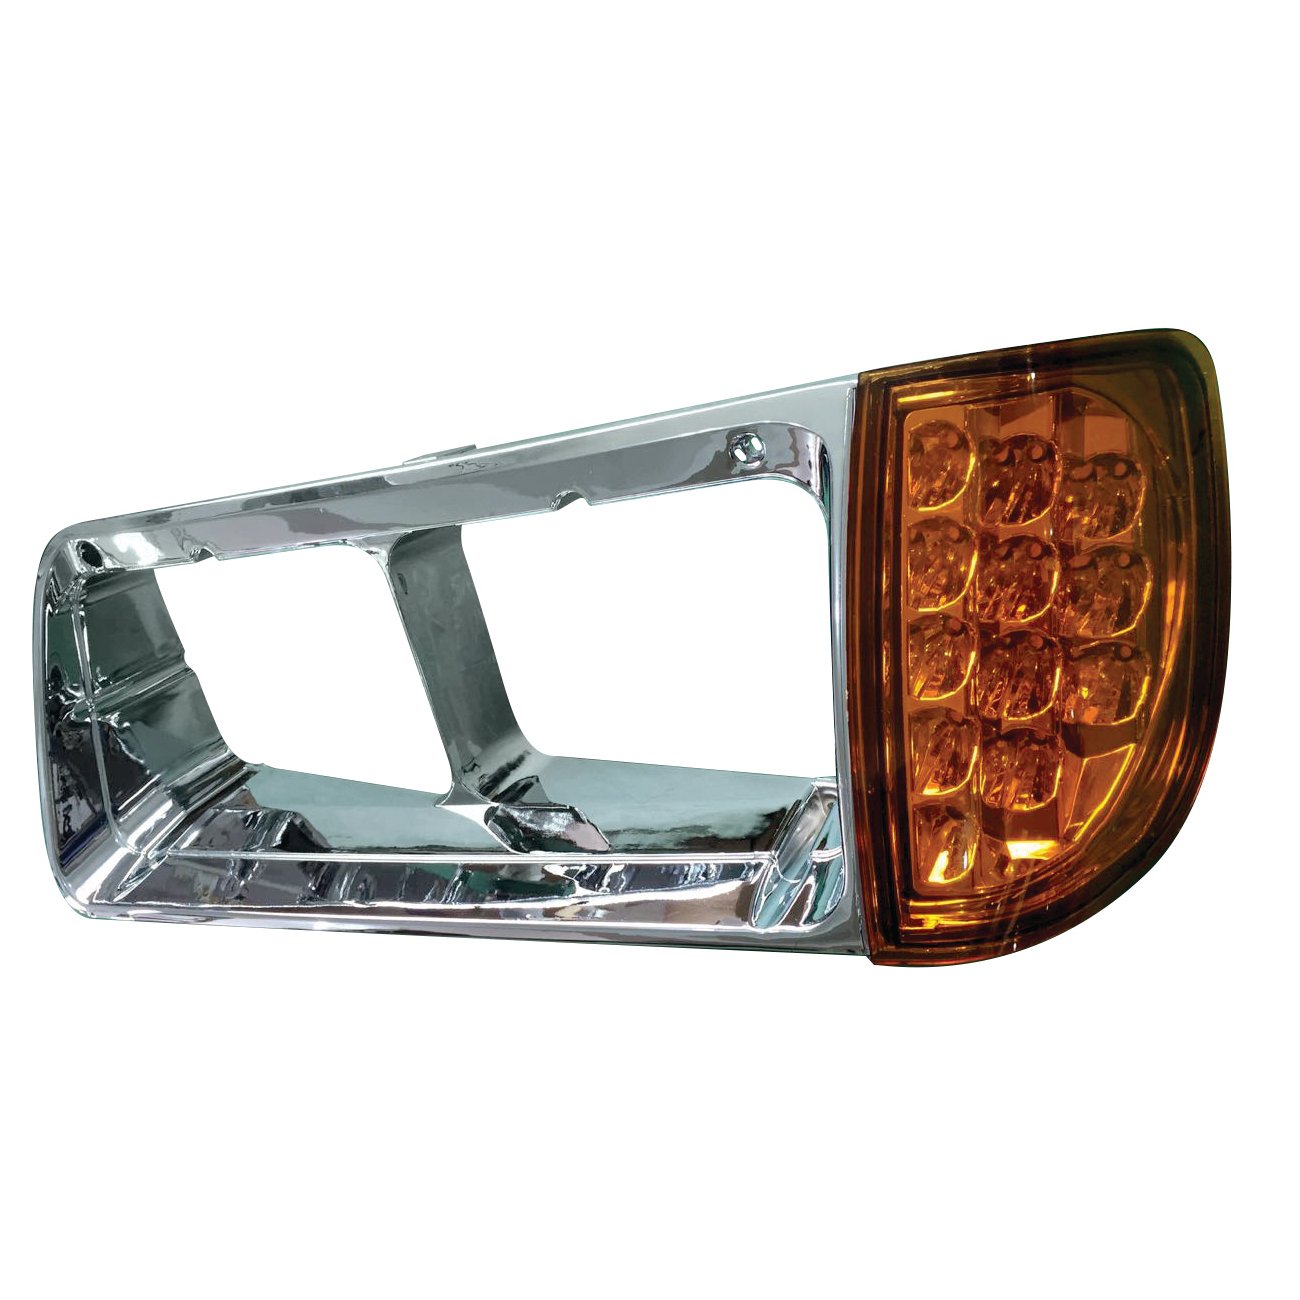 Fortpro Led Turn Signal Assembly & Bezel For Freightliner FLD Headlights Replaces A06-20738-000/A06-20738-001